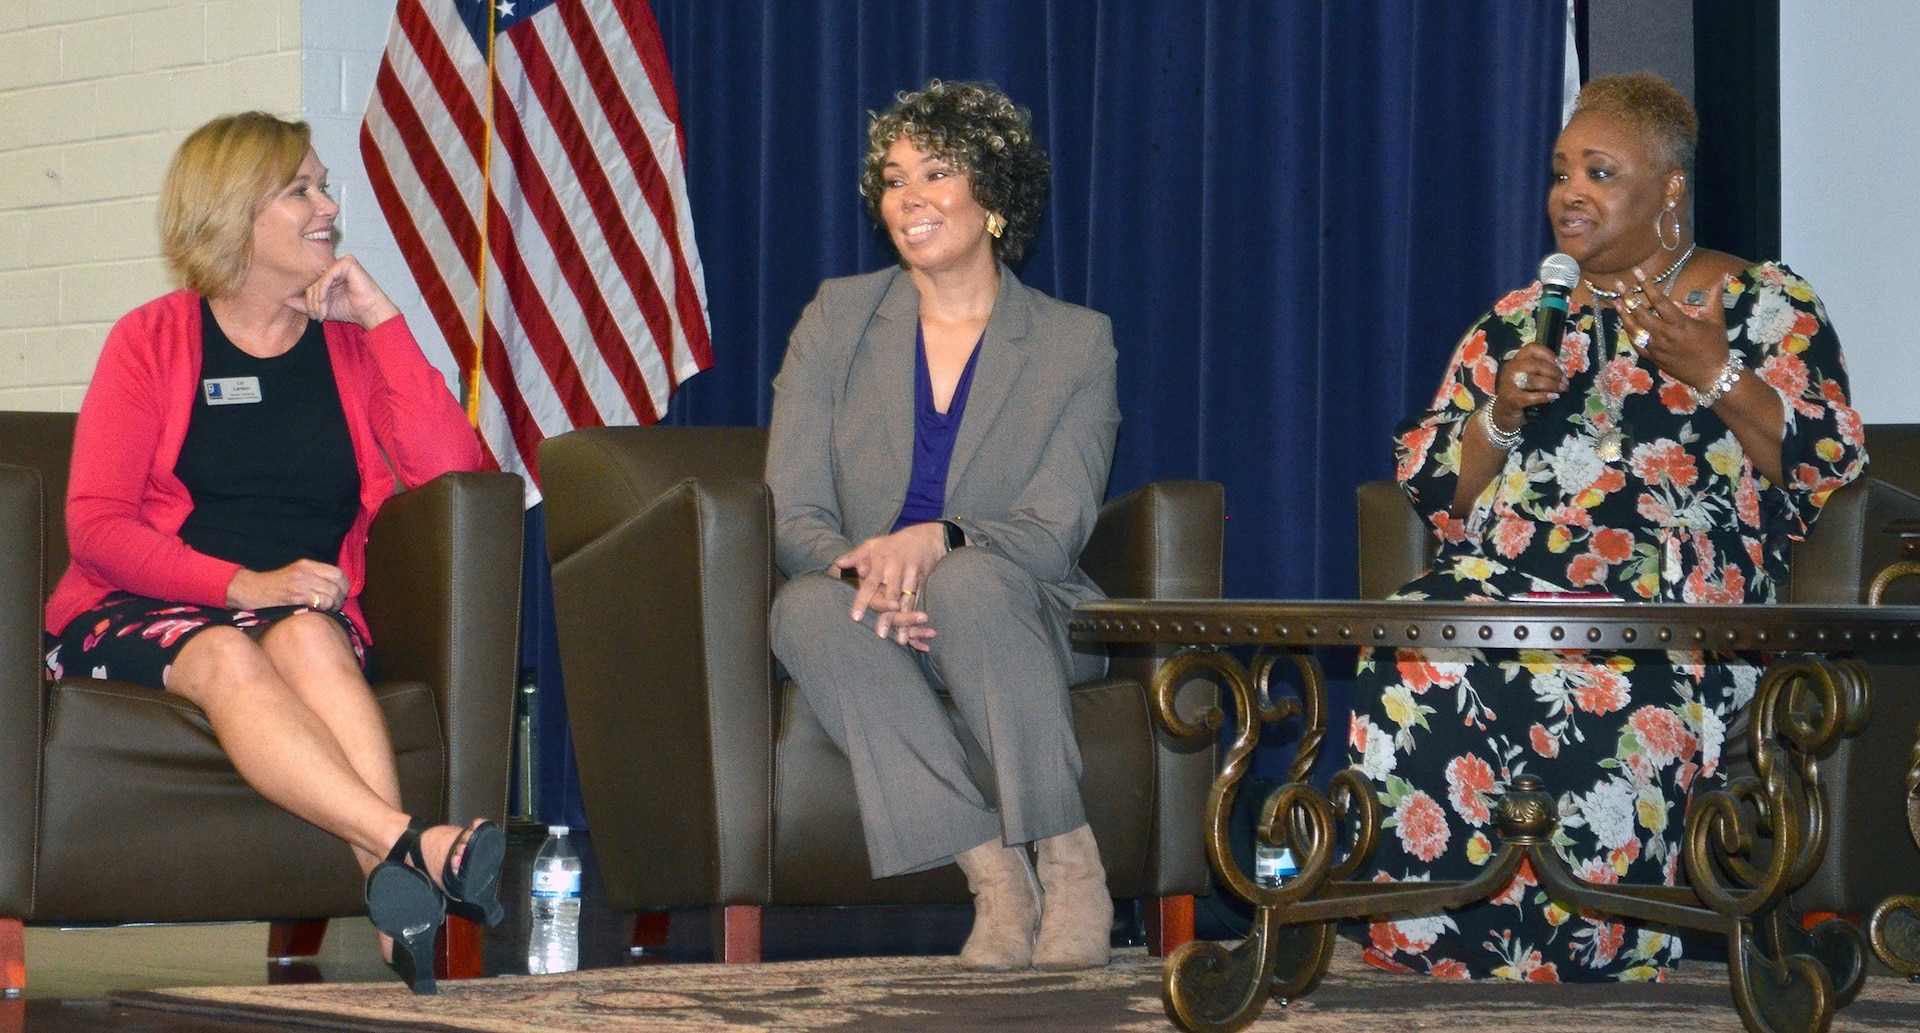 Della Gooding (right) speaks on a panel of spouses of transitioning service members, including Elizabeth Larsen (left) and Kristel Williams (center) during the TAP Too workshop Aug. 28 at the Joint Base San Antonio-Fort Sam Houston Military & Family Readiness Center. The panel consisted of six spouses who have gone through the transition process and shared their experiences with workshop attendees. The workshop was for spouses of transitioning service members and included topics and issues impacting spouses of transitioning service members covered by subject matter experts from programs and organizations throughout JBSA and the local community.